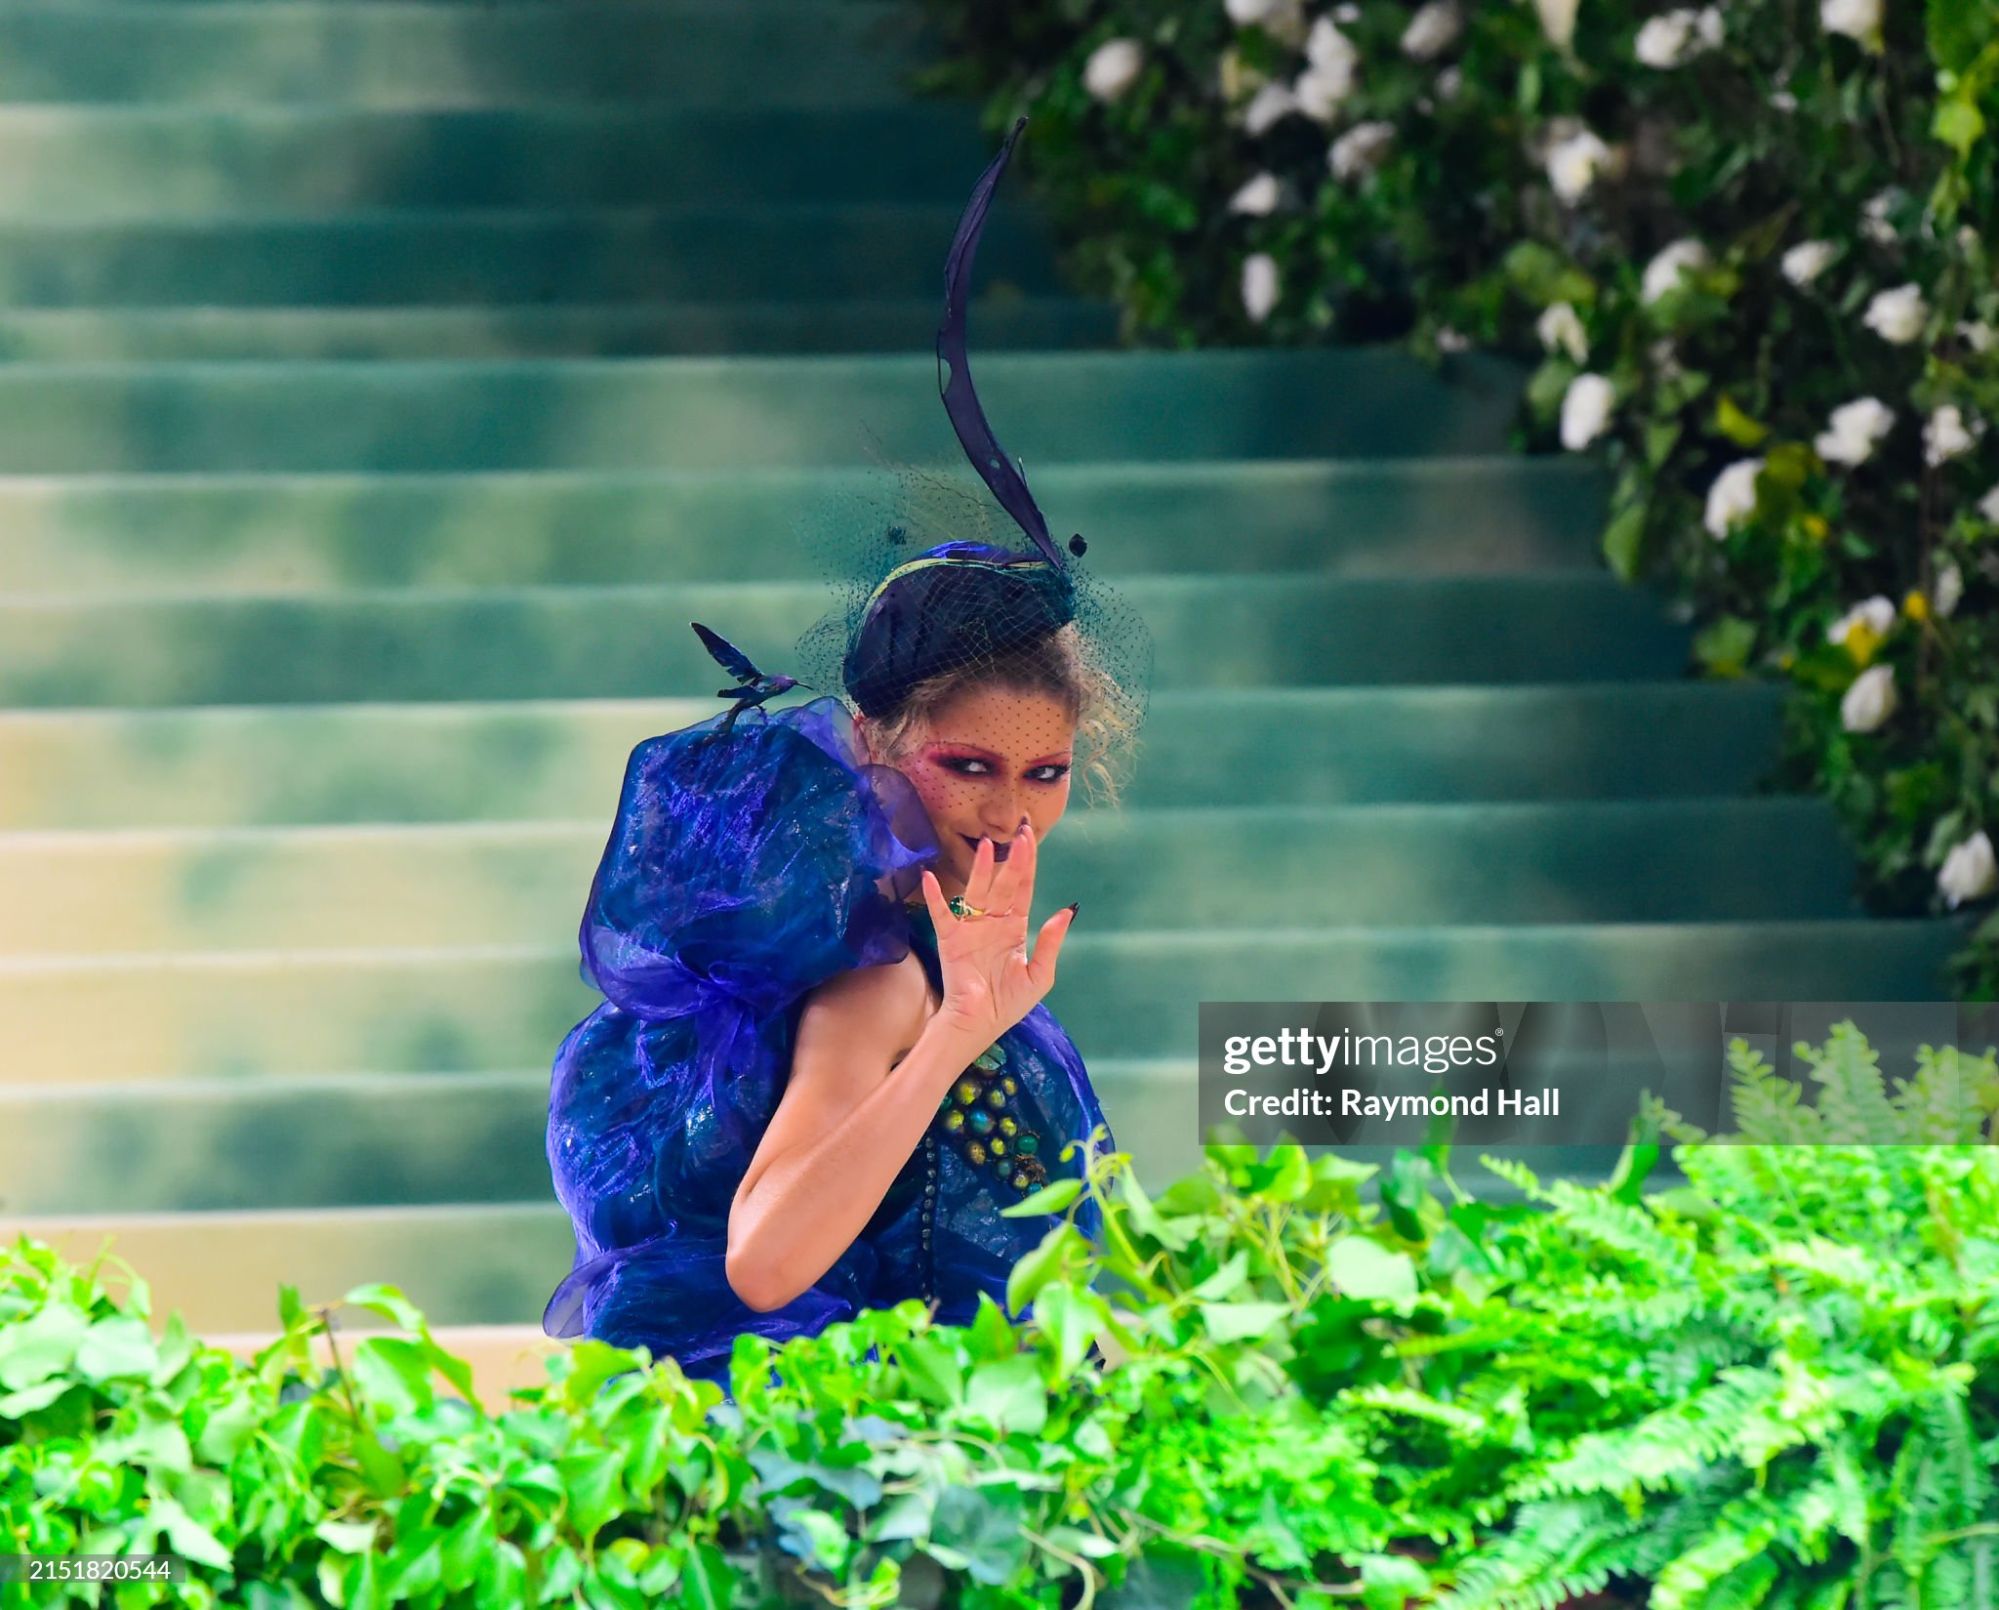 gettyimages-2151820544-2048x2048.jpg